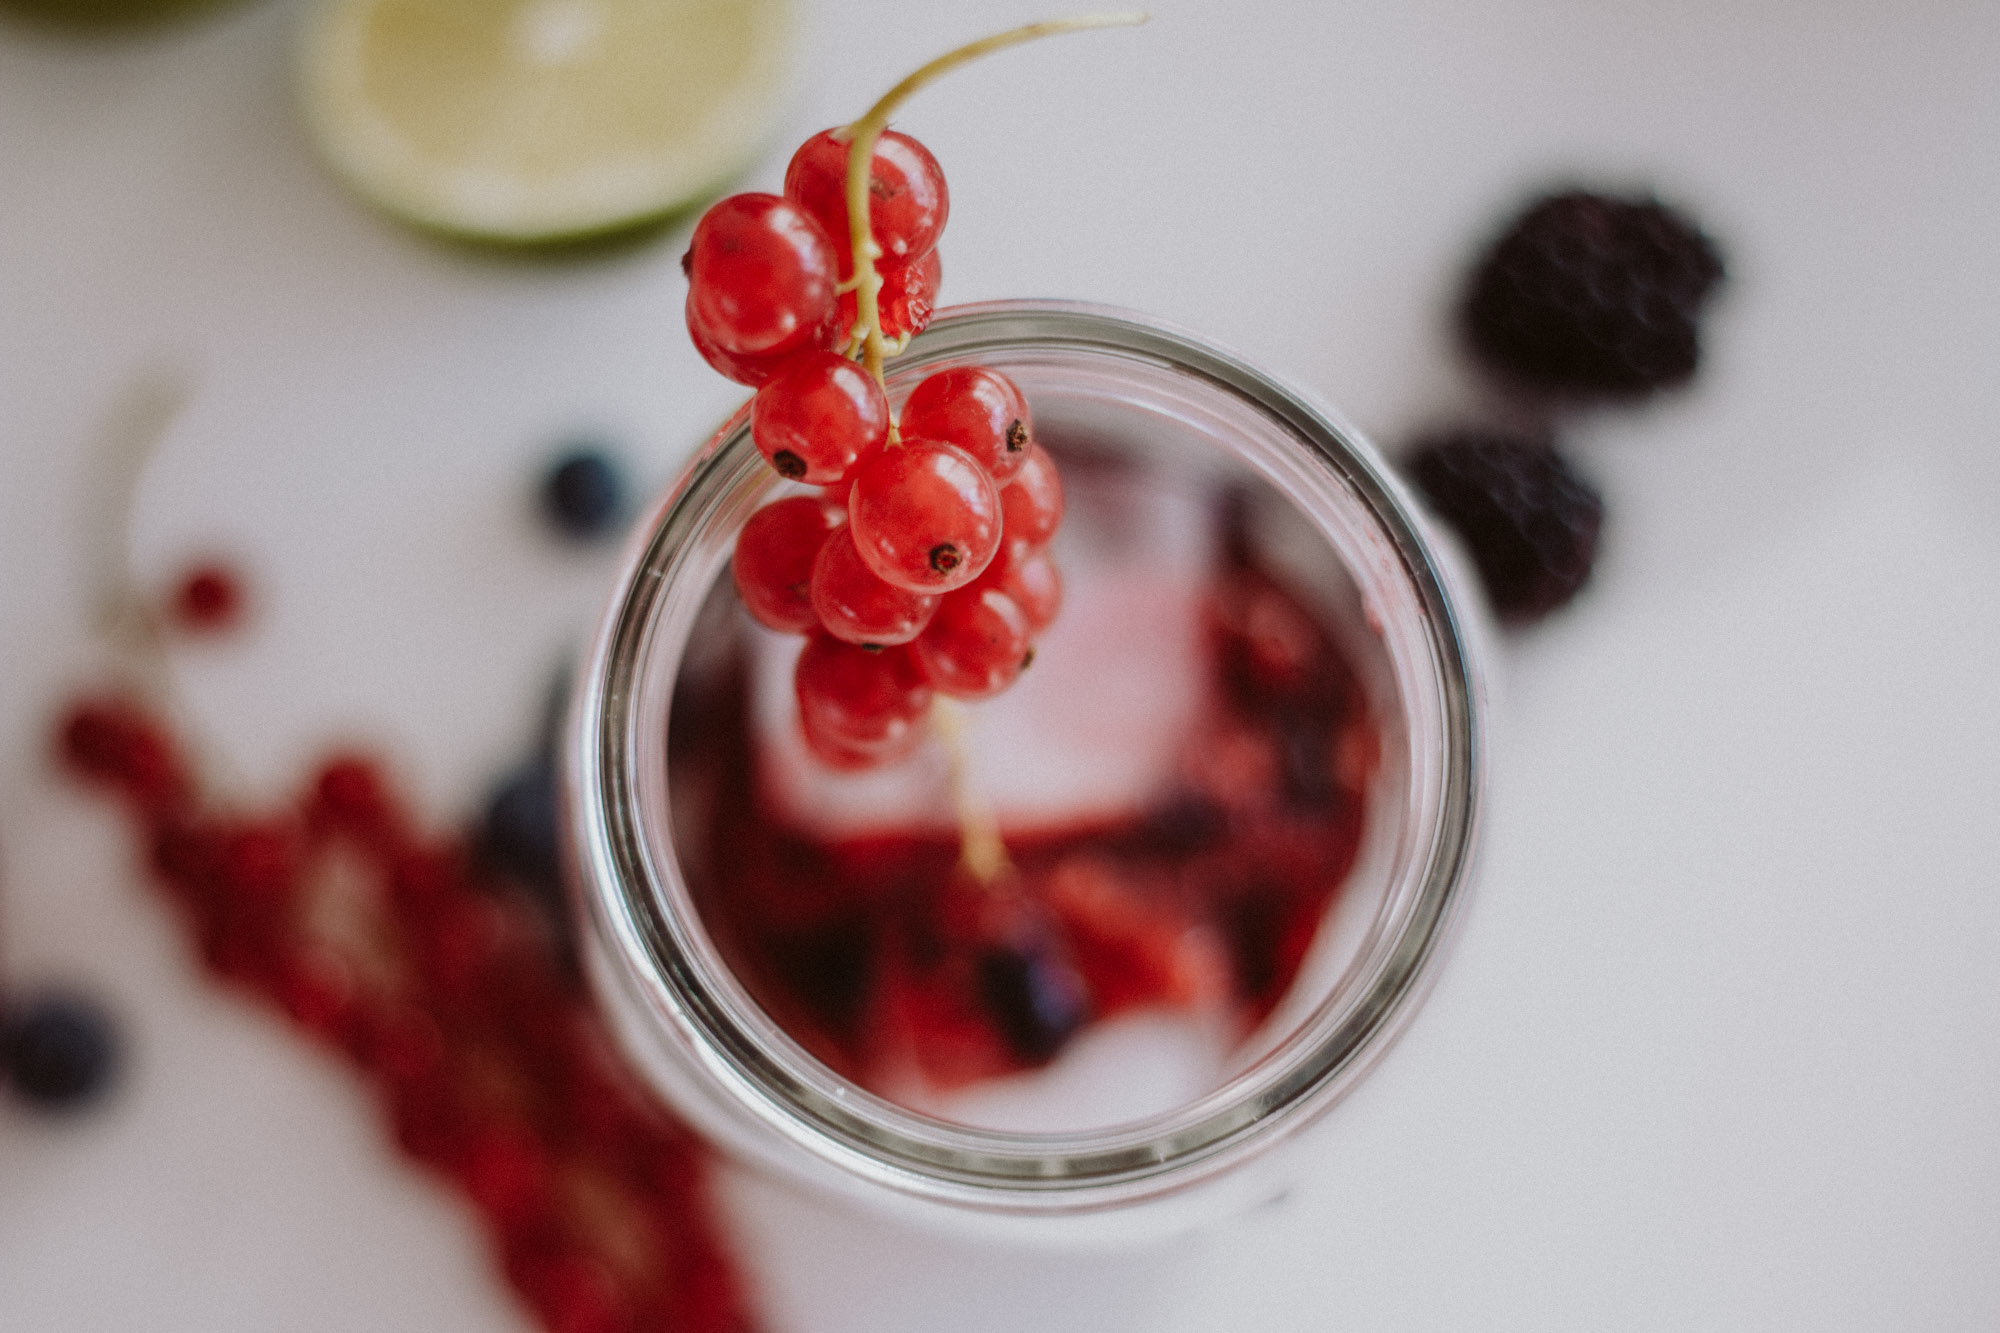 Spiked Berry Lemonade | Love Daily Dose